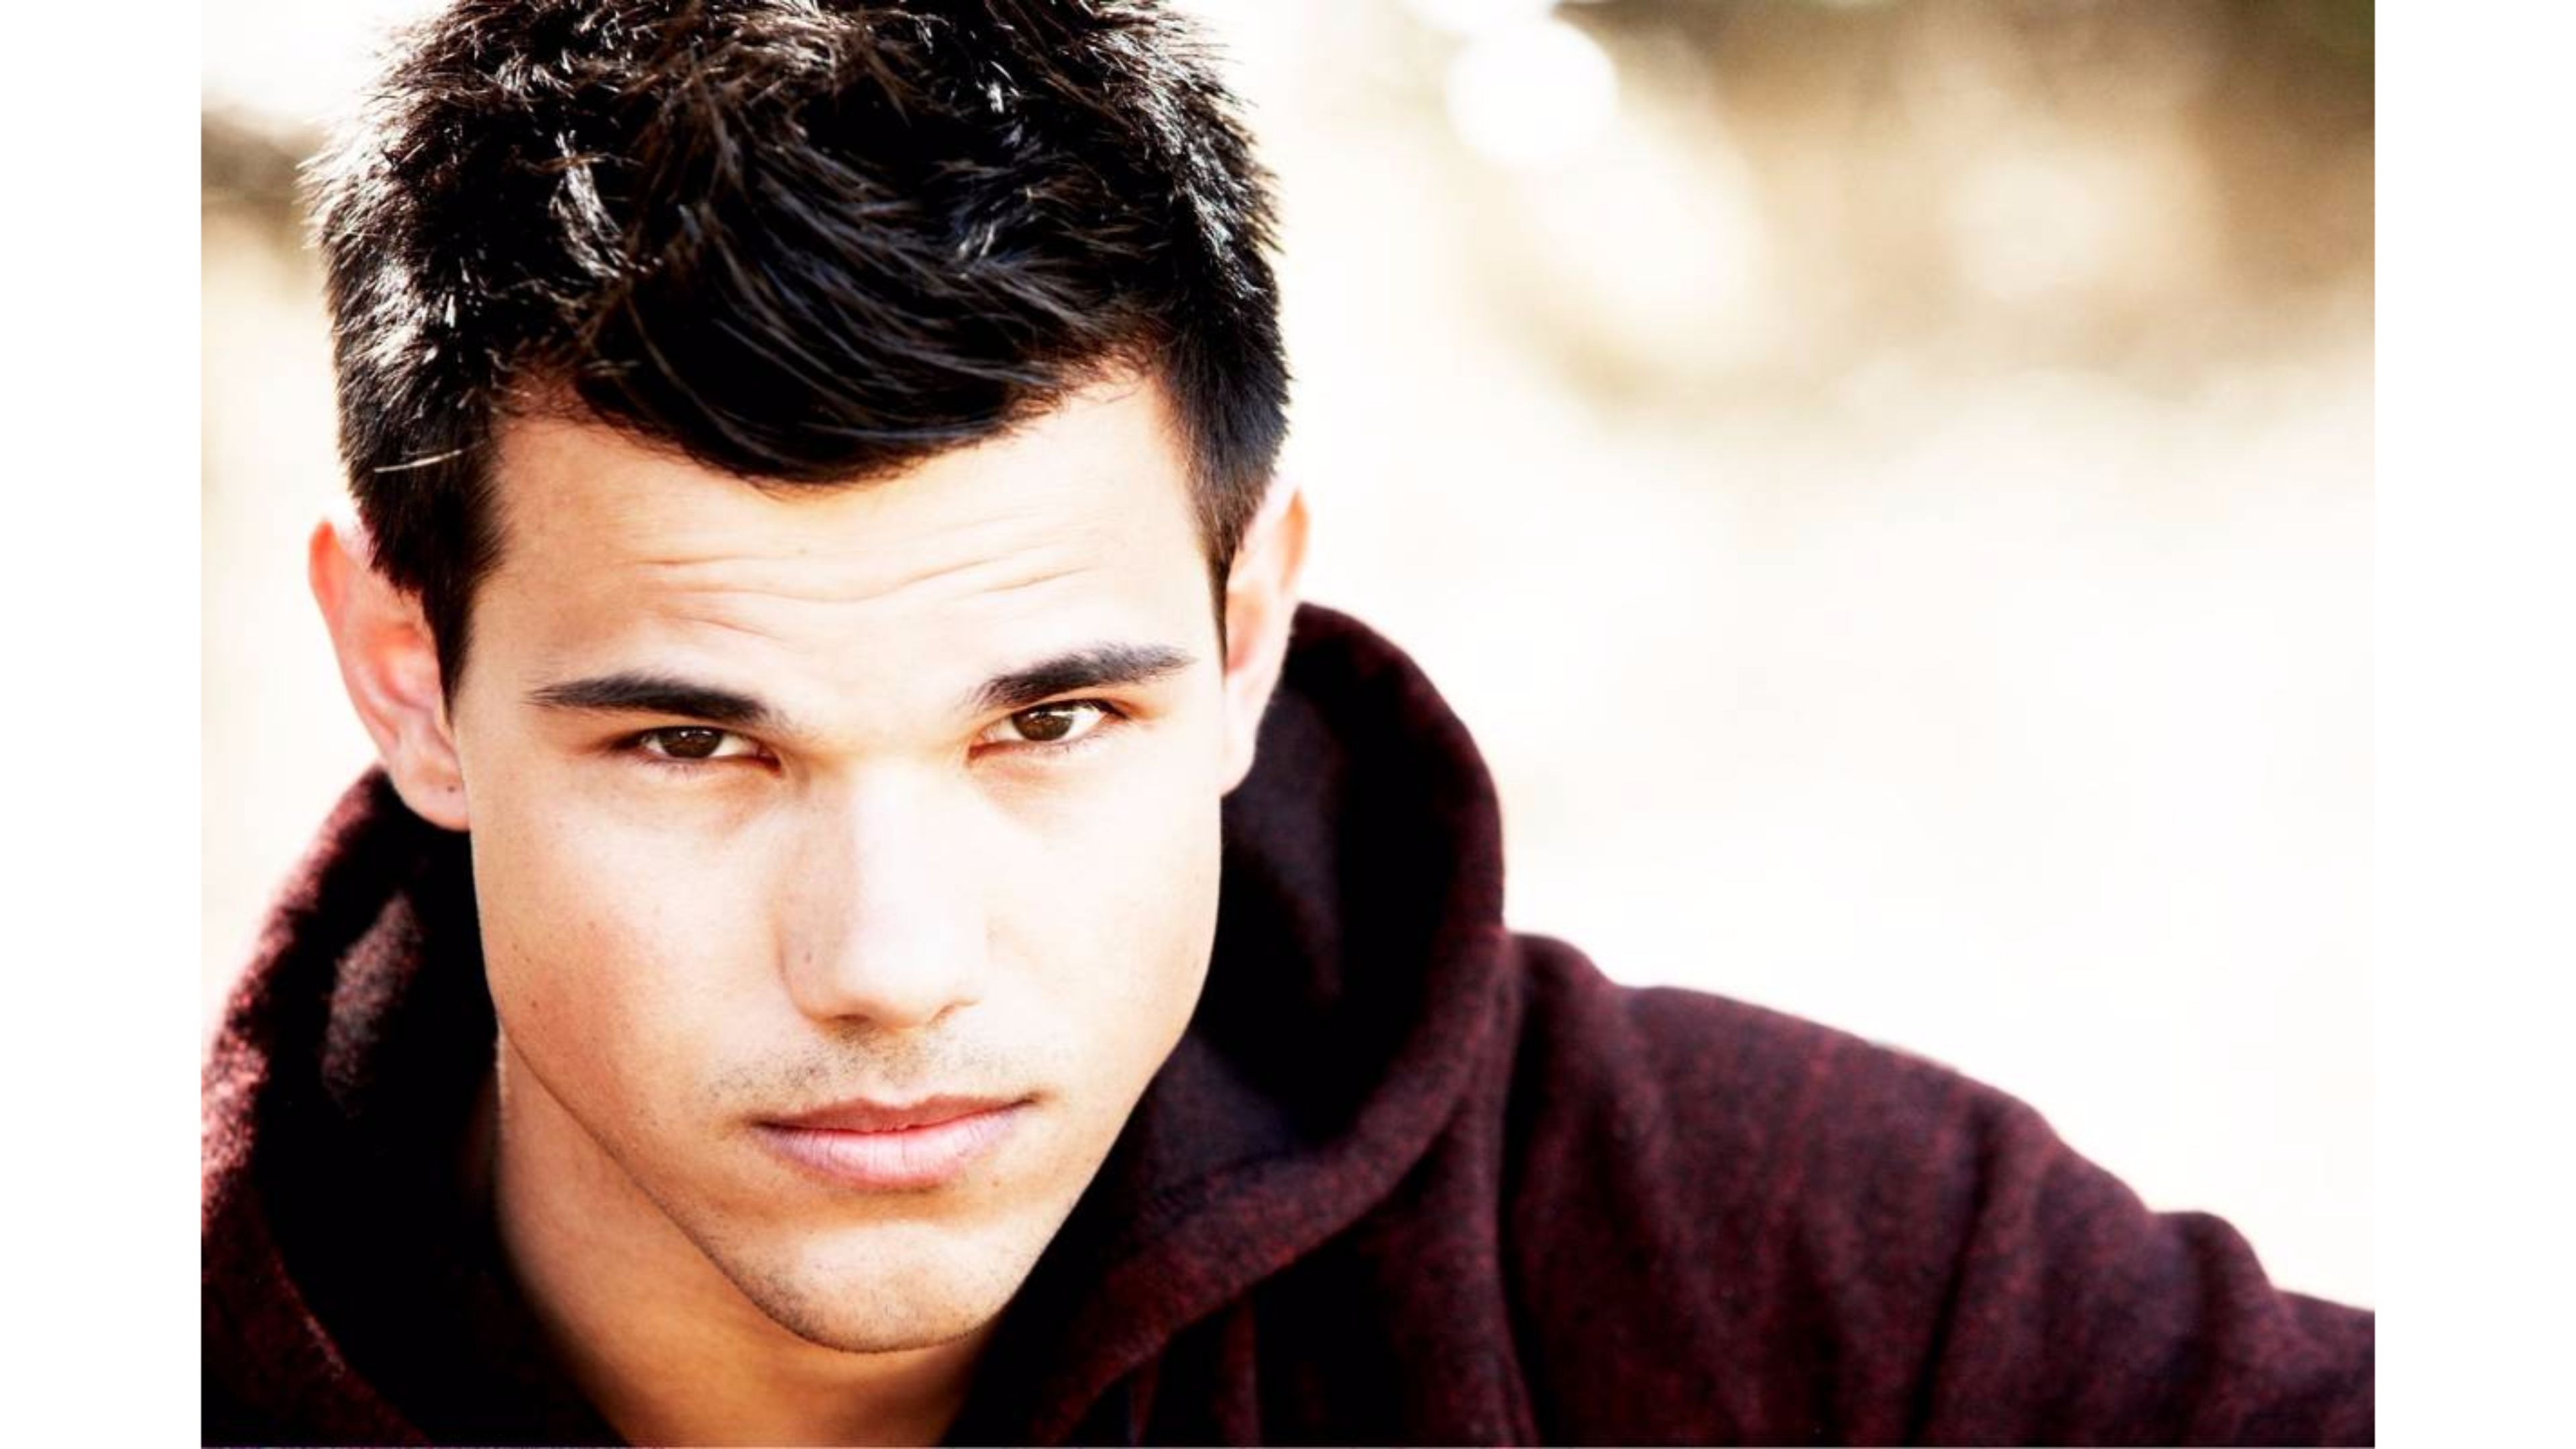 Taylor Lautner Background The